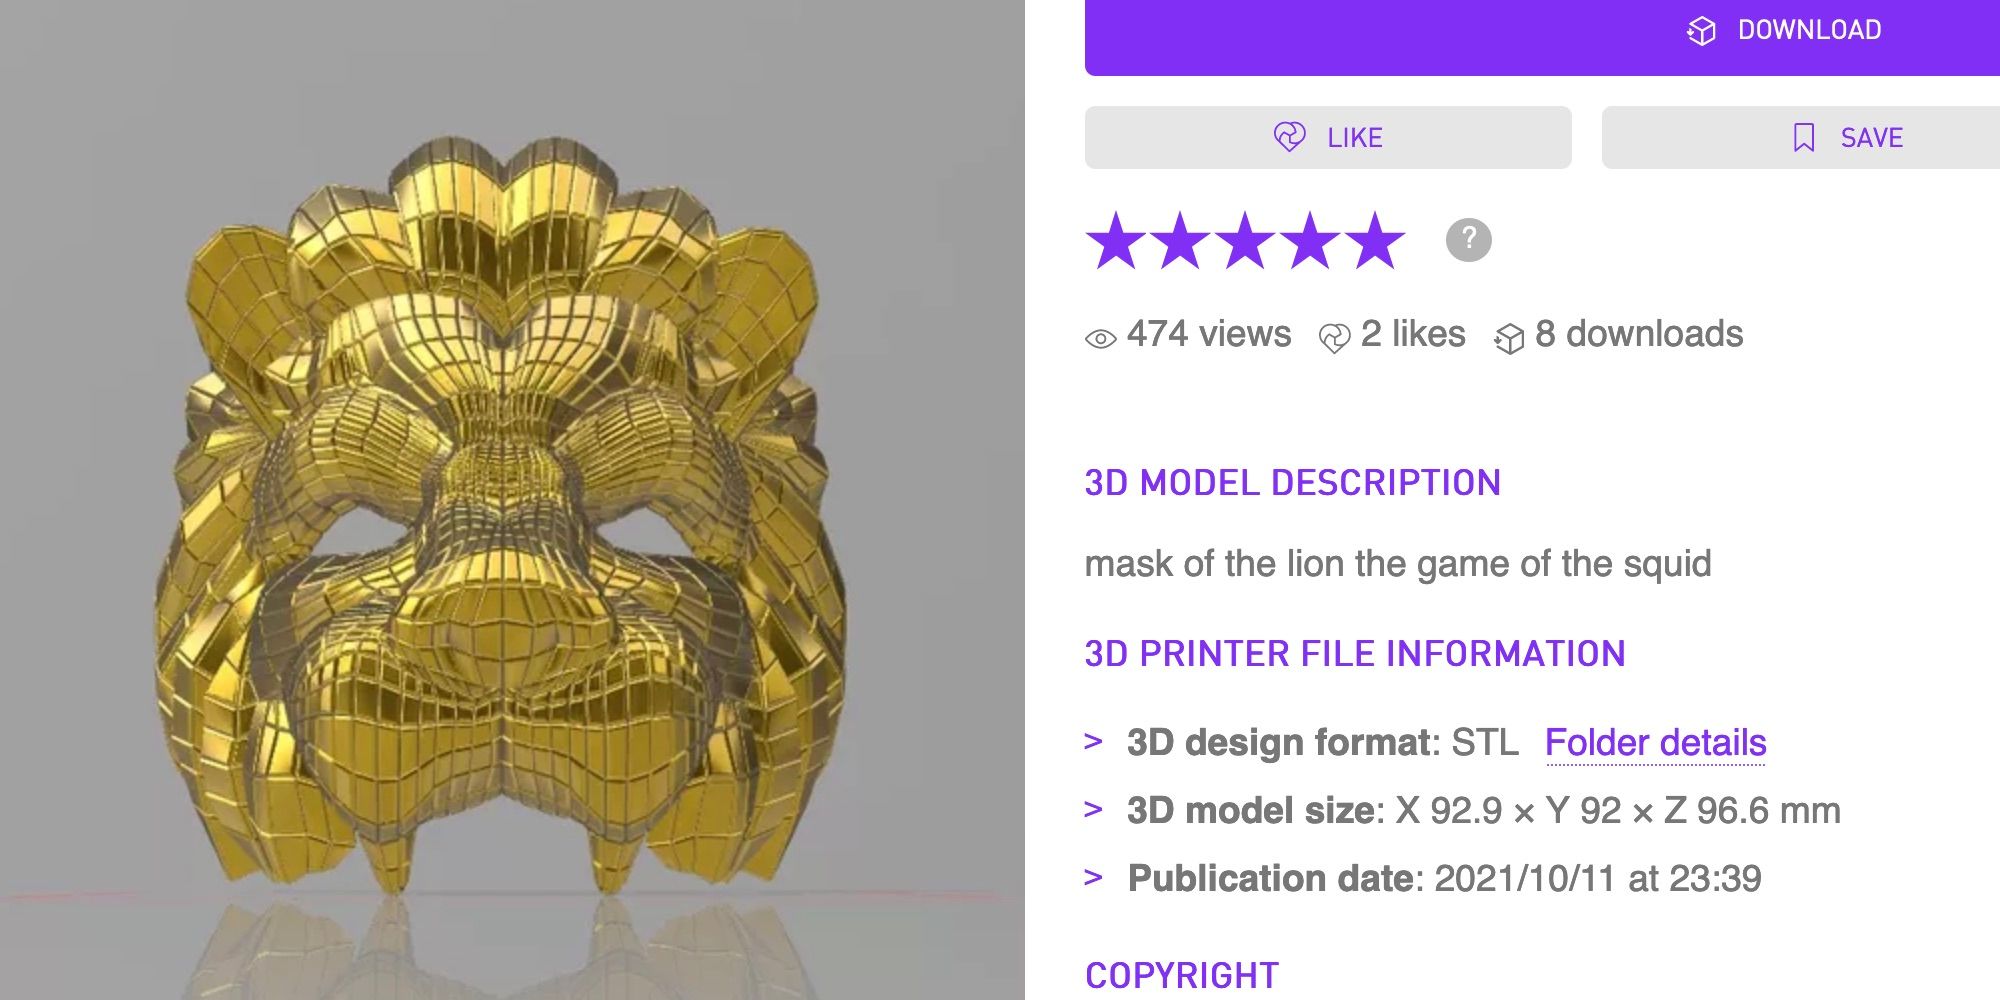 A 3D model of a golden lion mask next to information about the designer